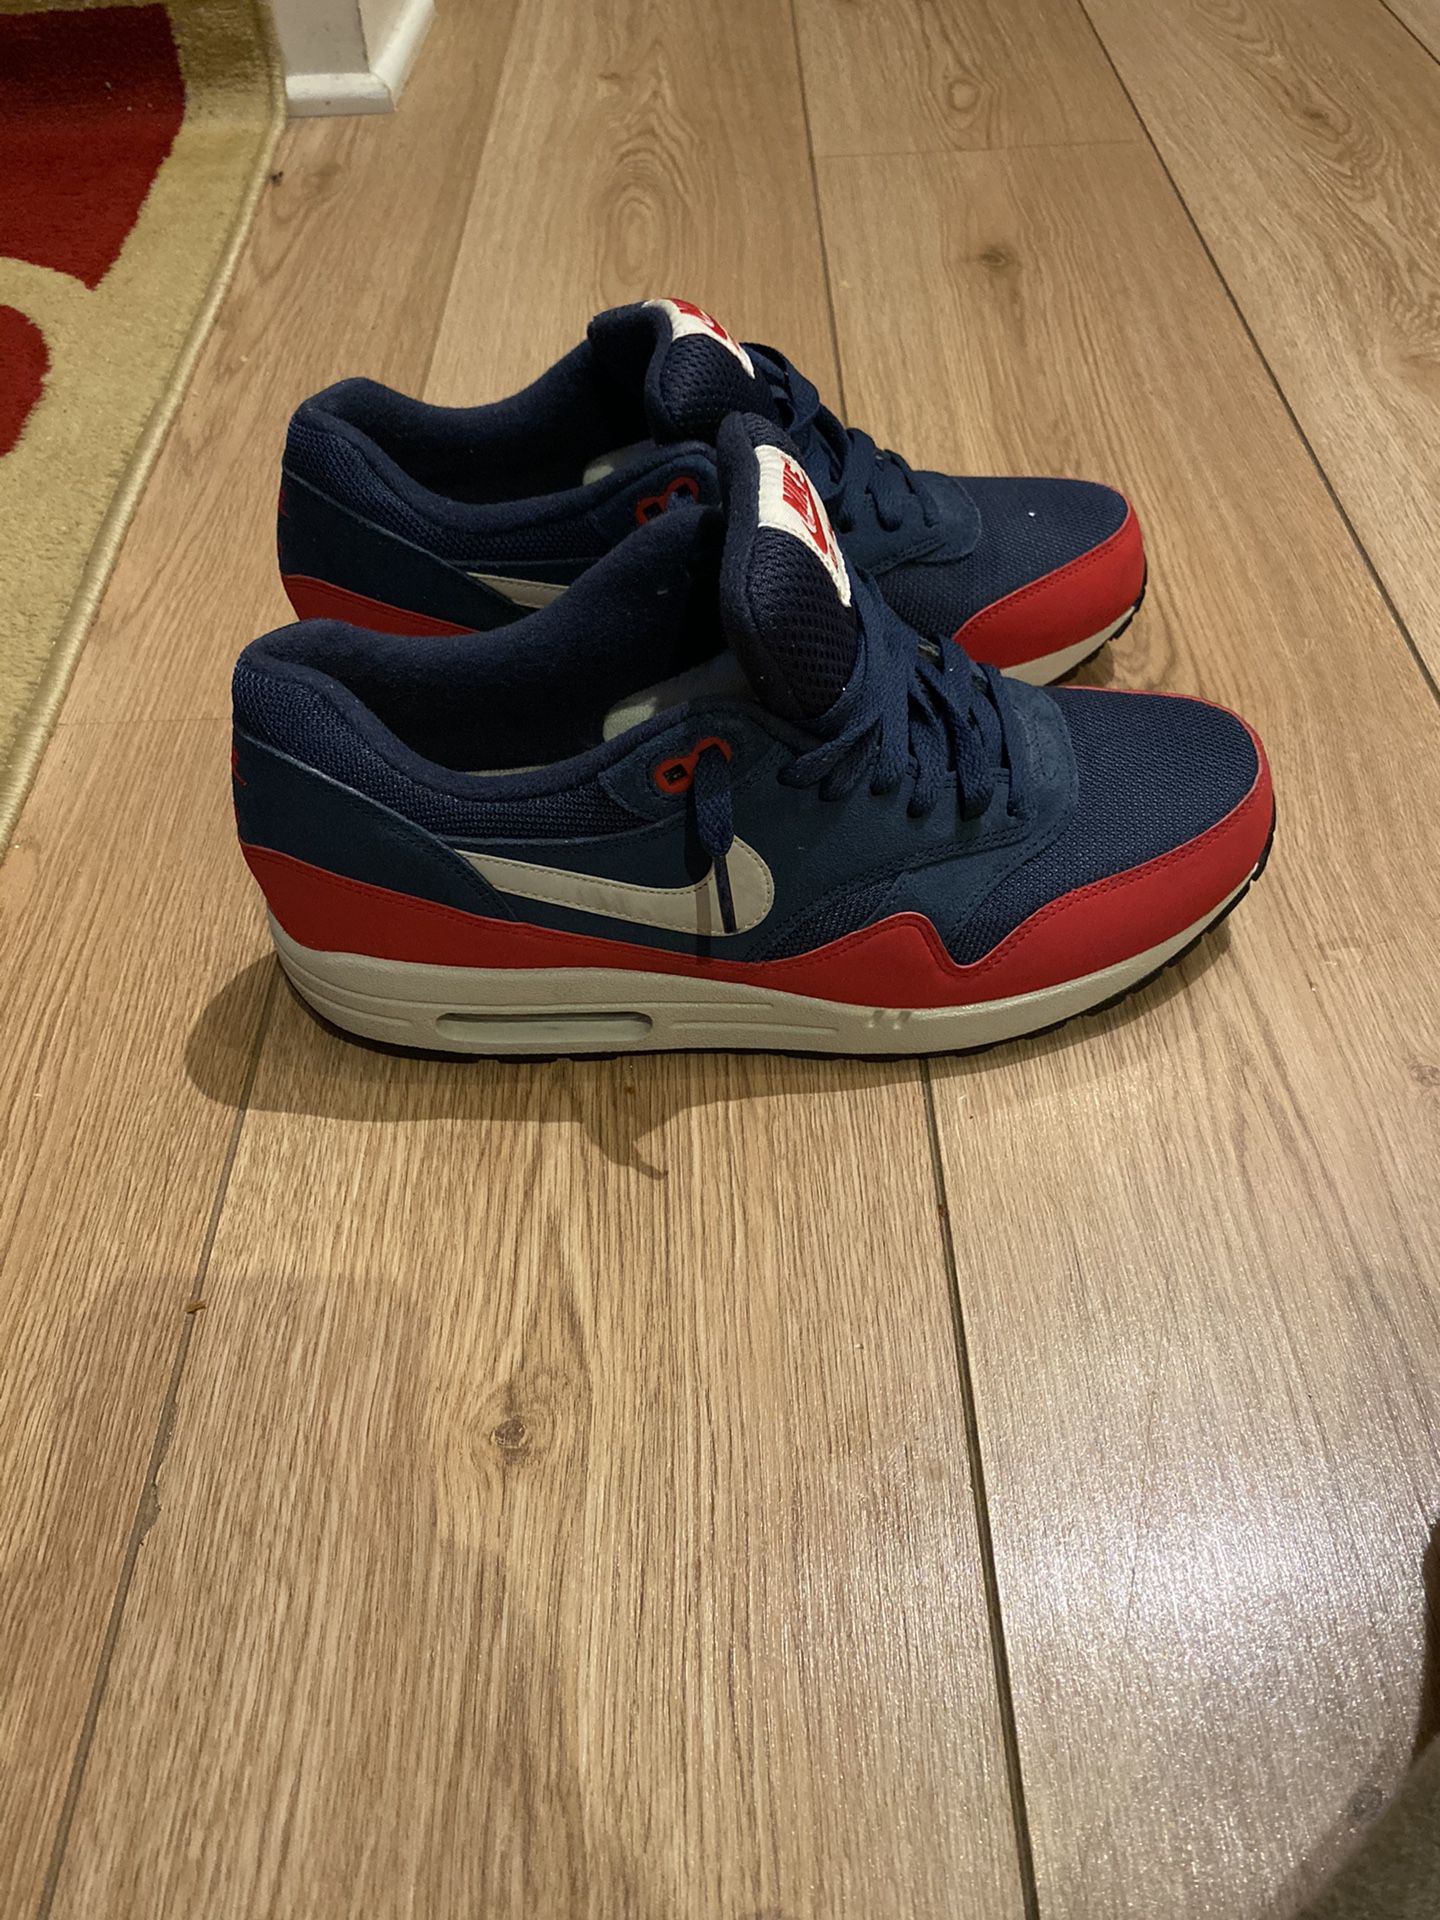 NIKE AIR MAX 1 ESSENTIAL Midnight Navy/University Red Size 10